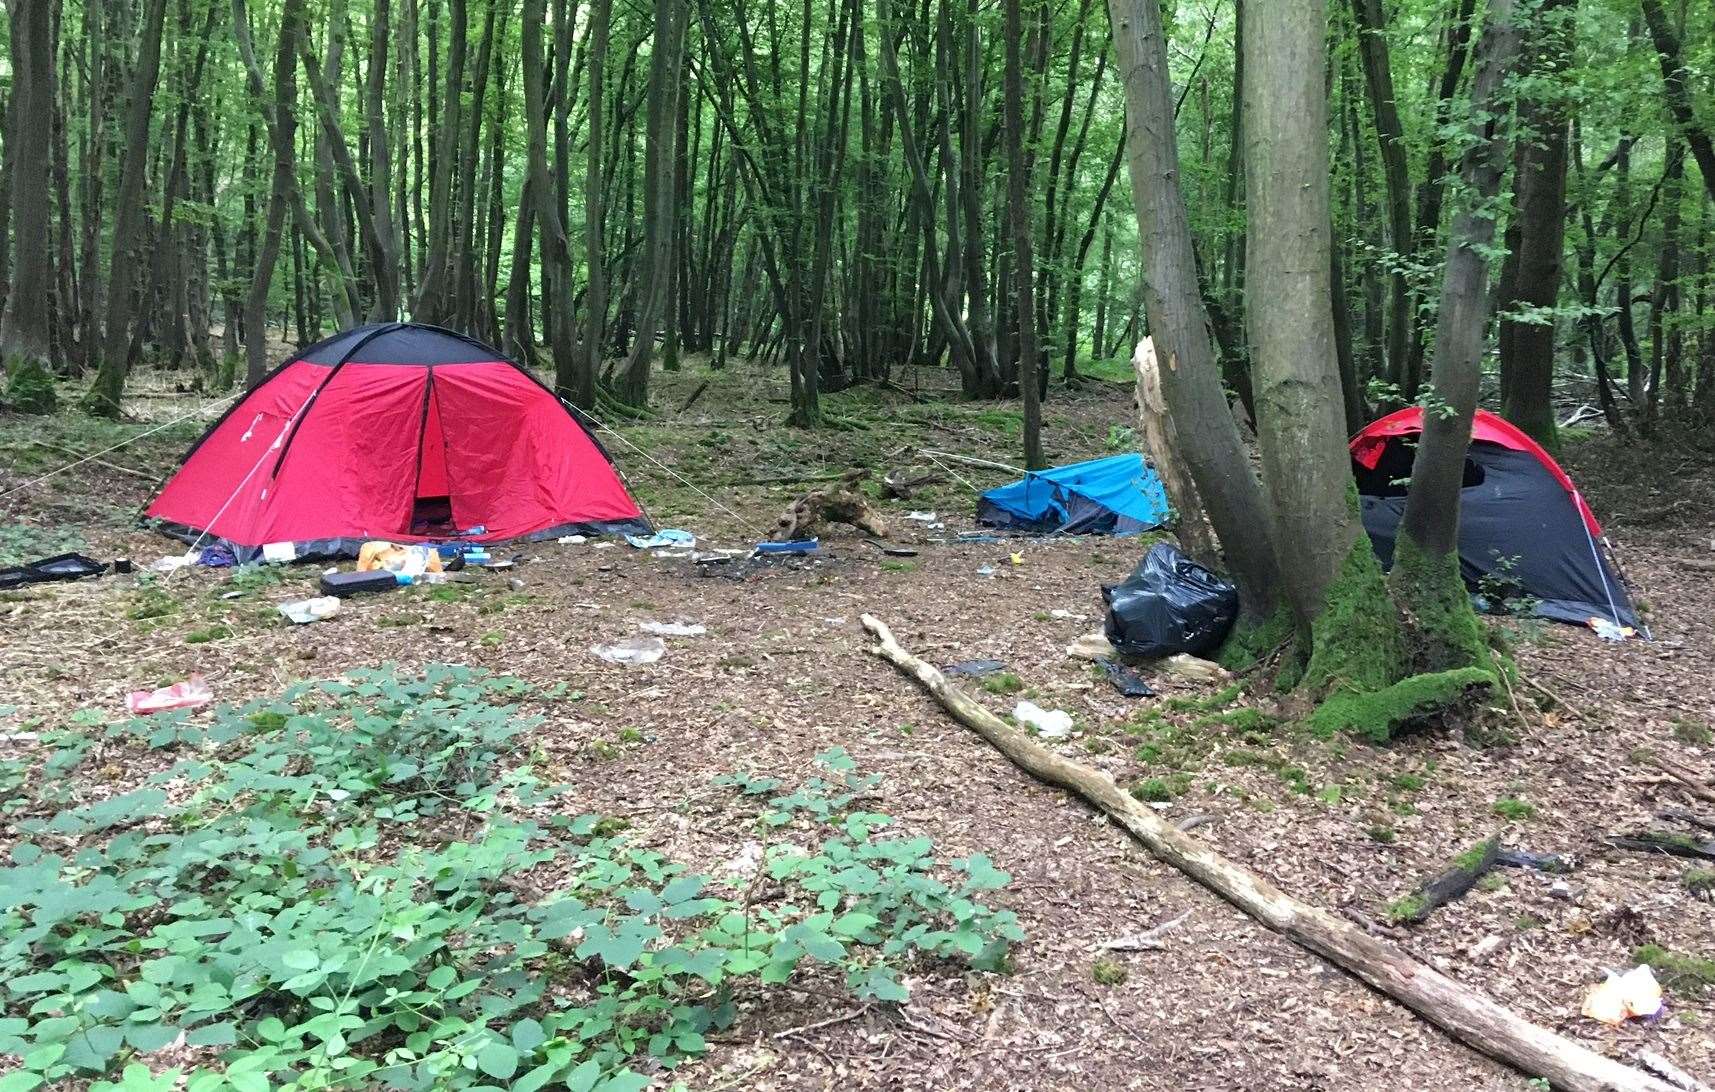 Wild campers have been leaving litter in the woods